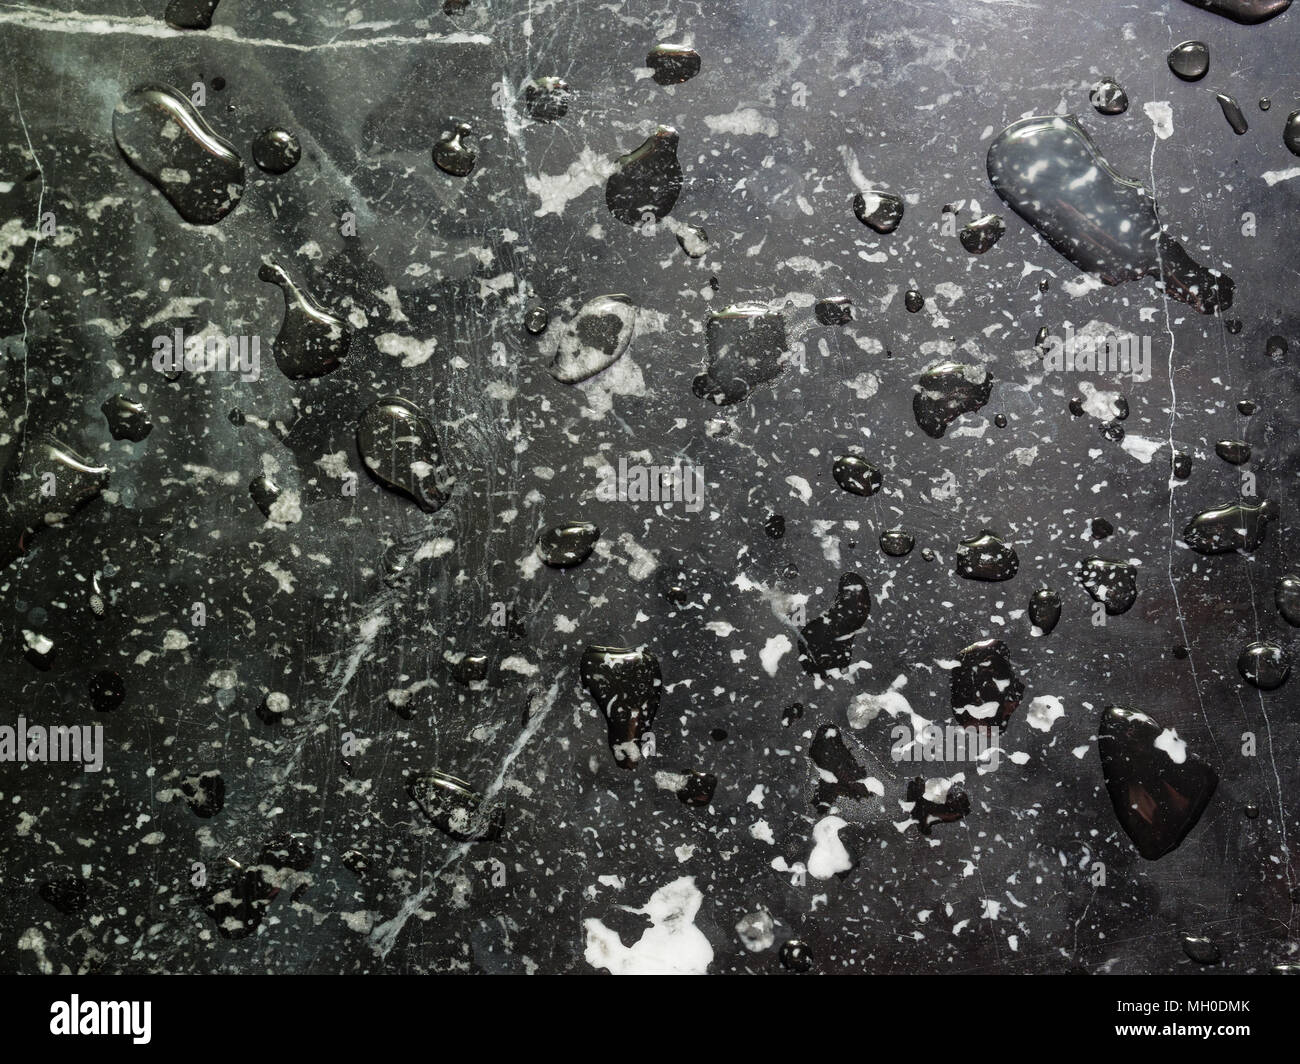 Black and white marble texture in abstract style with water drops, drips and splash, used as background in monotone, vintage, retro, grunge, artistic and abstract theme Stock Photo